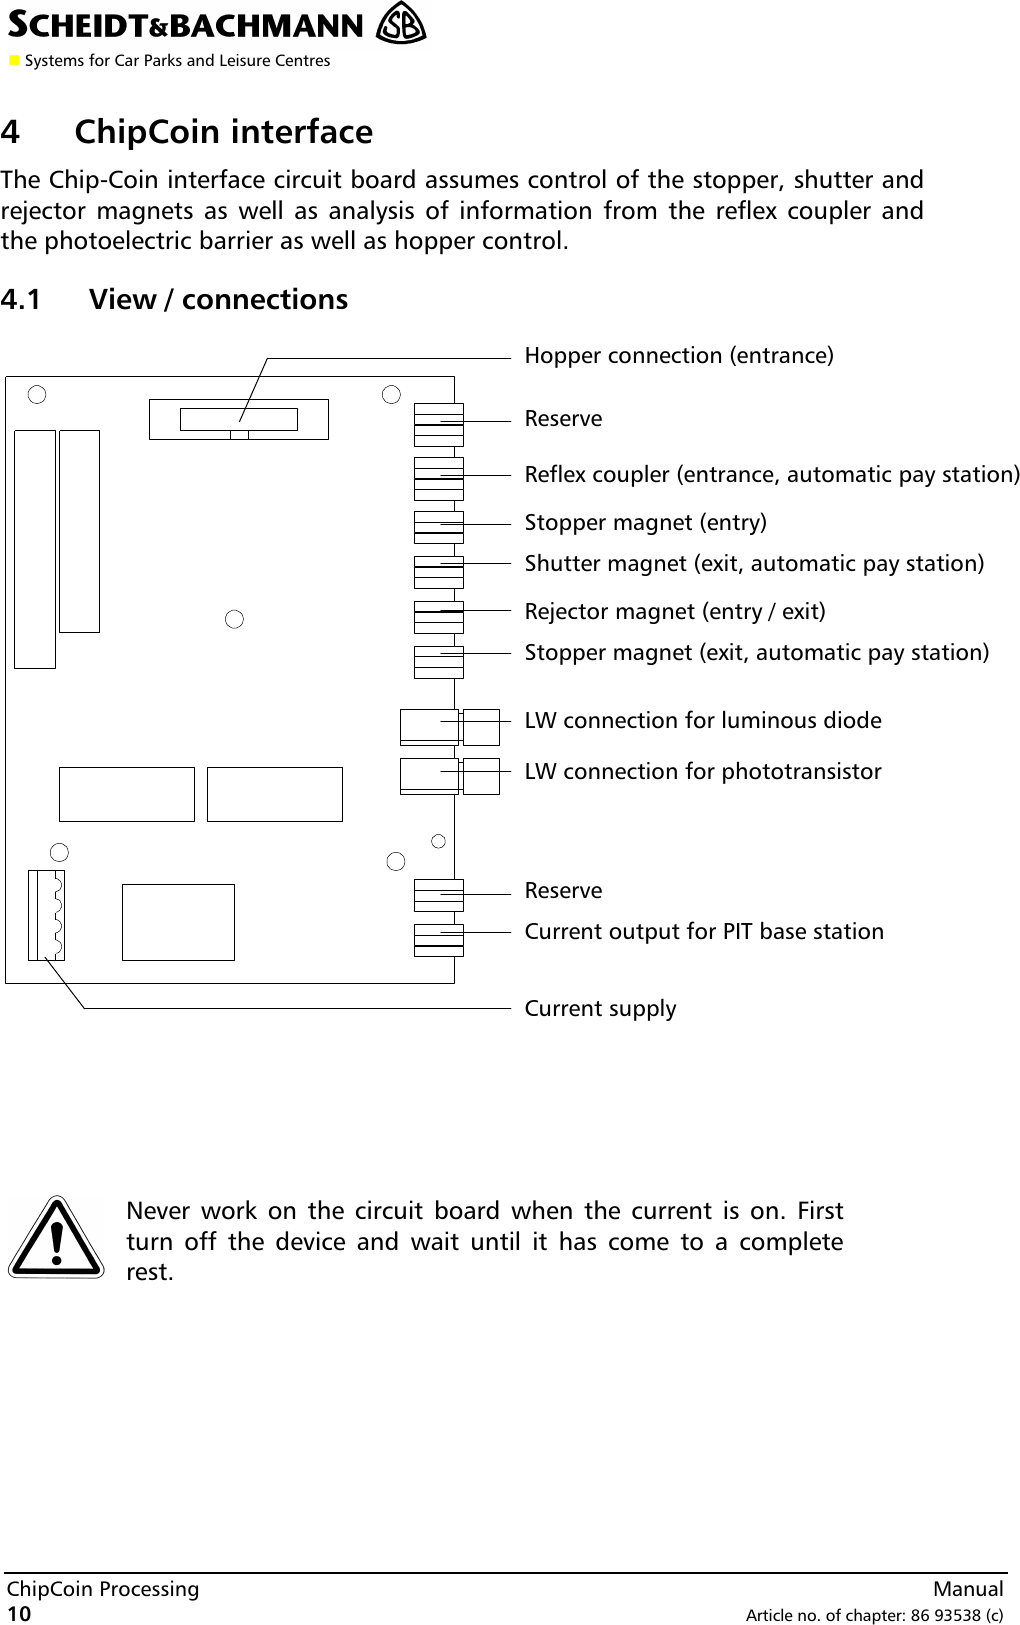 n Systems for Car Parks and Leisure CentresChipCoin Processing  Manual10 Article no. of chapter: 86 93538 (c)4ChipCoin interfaceThe Chip-Coin interface circuit board assumes control of the stopper, shutter andrejector magnets as well as analysis of information from the reflex coupler andthe photoelectric barrier as well as hopper control.4.1 View / connectionsNever work on the circuit board when the current is on. Firstturn off the device and wait until it has come to a completerest.ReserveReflex coupler (entrance, automatic pay station)Stopper magnet (entry)Shutter magnet (exit, automatic pay station)Rejector magnet (entry / exit)Stopper magnet (exit, automatic pay station)LW connection for luminous diodeLW connection for phototransistorReserveCurrent output for PIT base stationHopper connection (entrance)Current supply